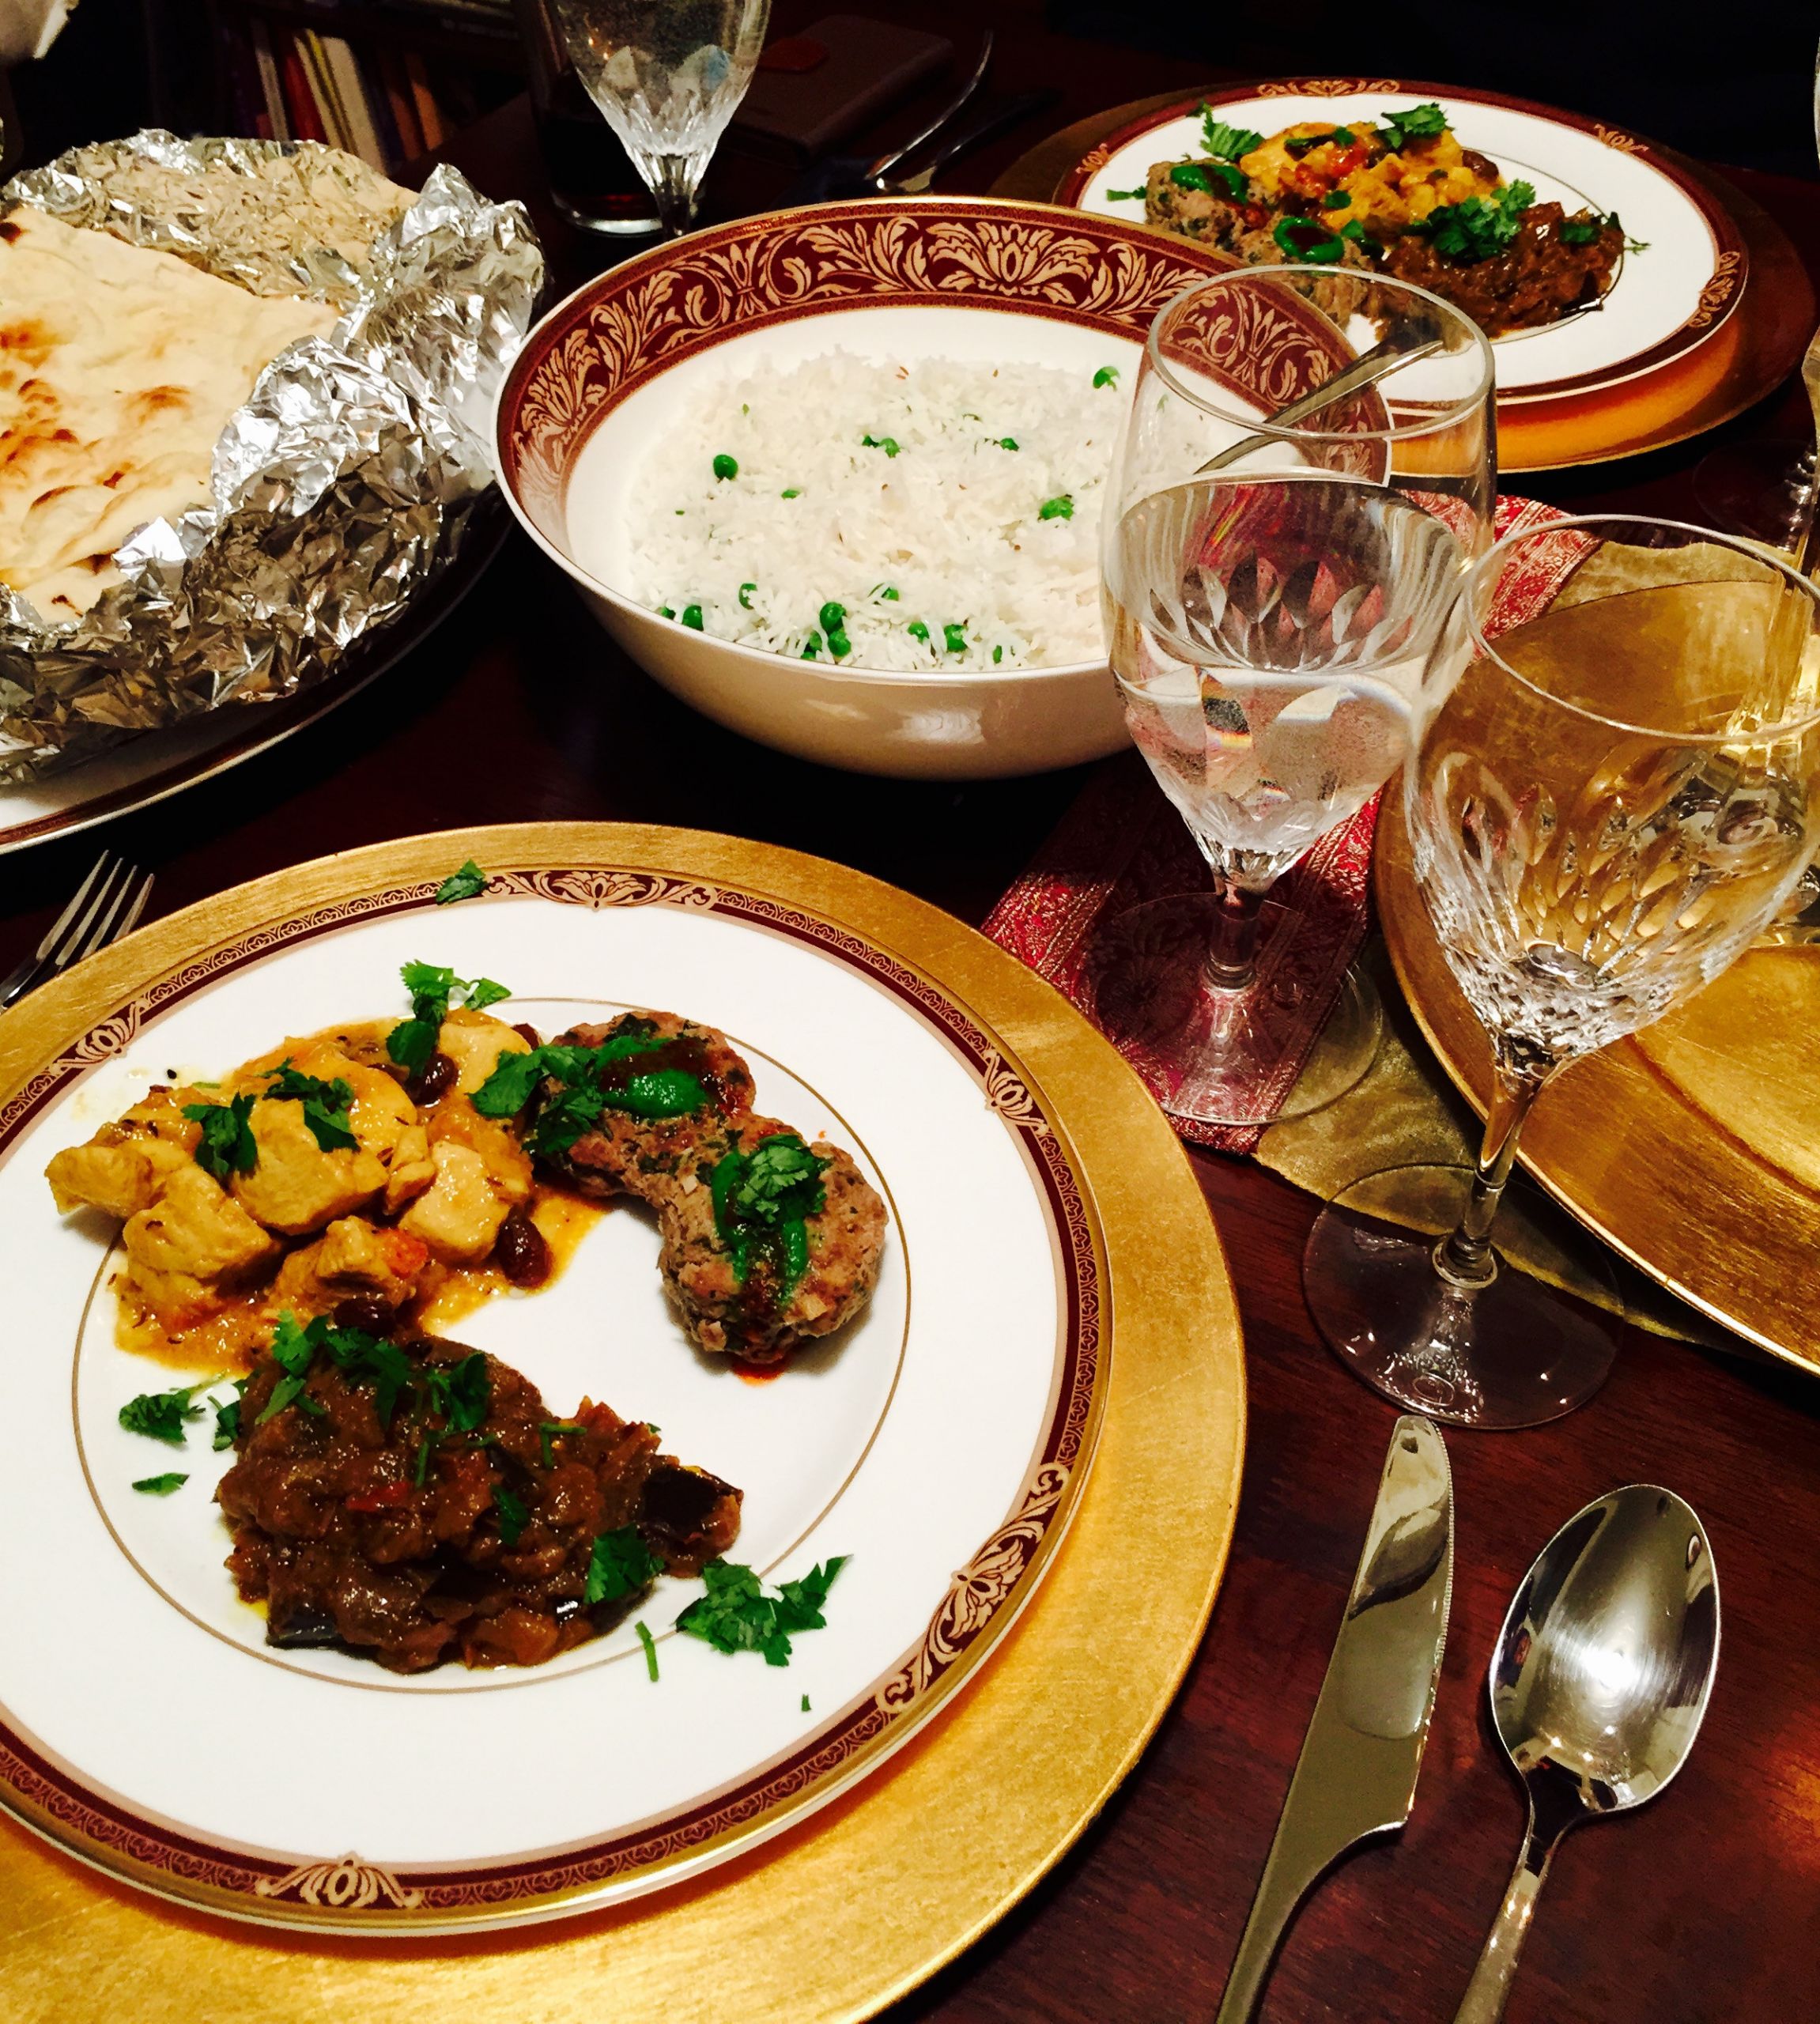 Menu Ideas For Dinner Party
 Hosting an Elegant Indian Dinner Party